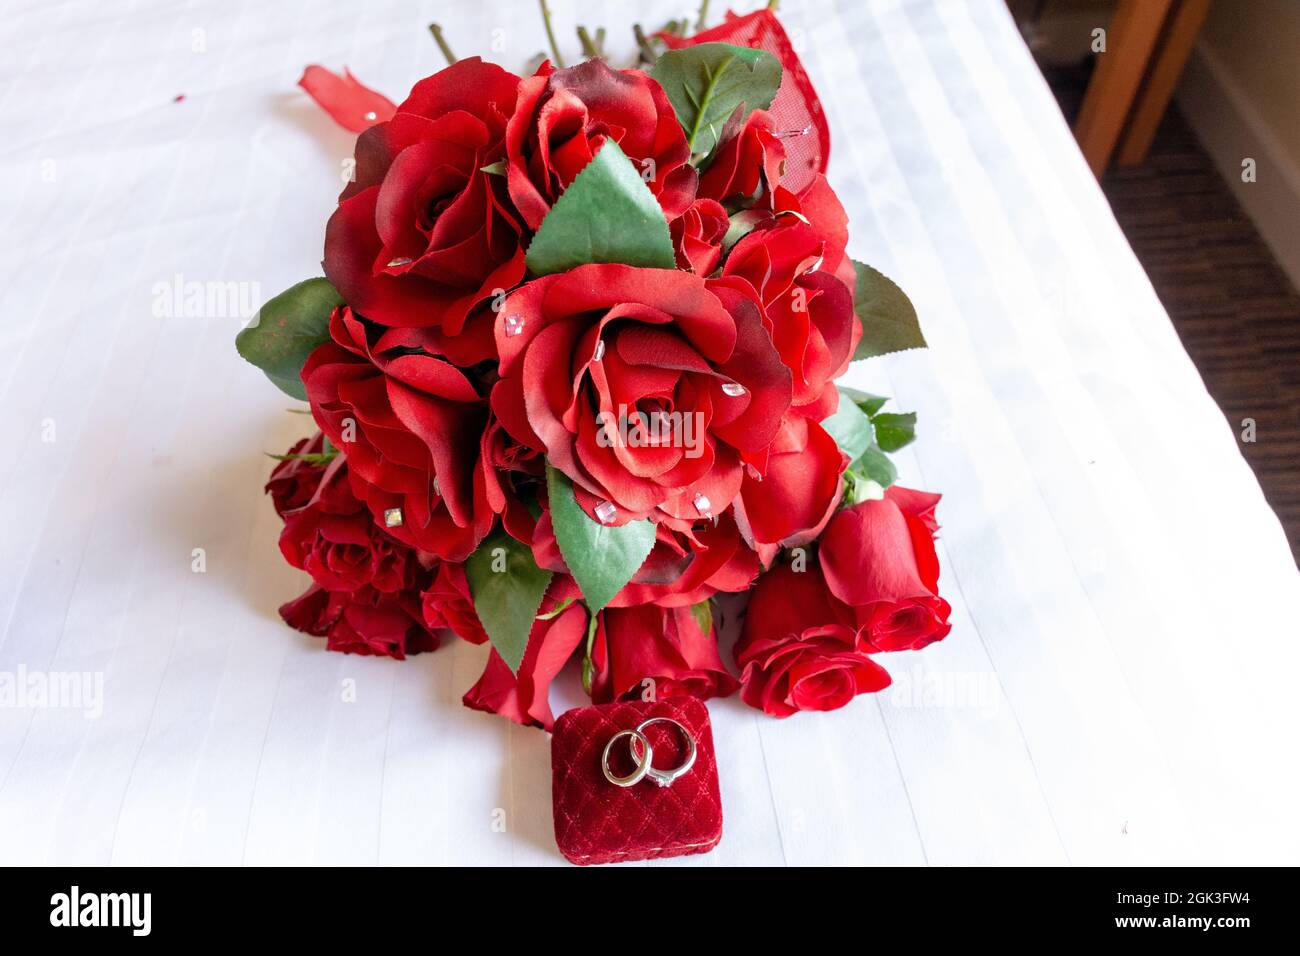 bouquet of red roses with wedding rings Stock Photo